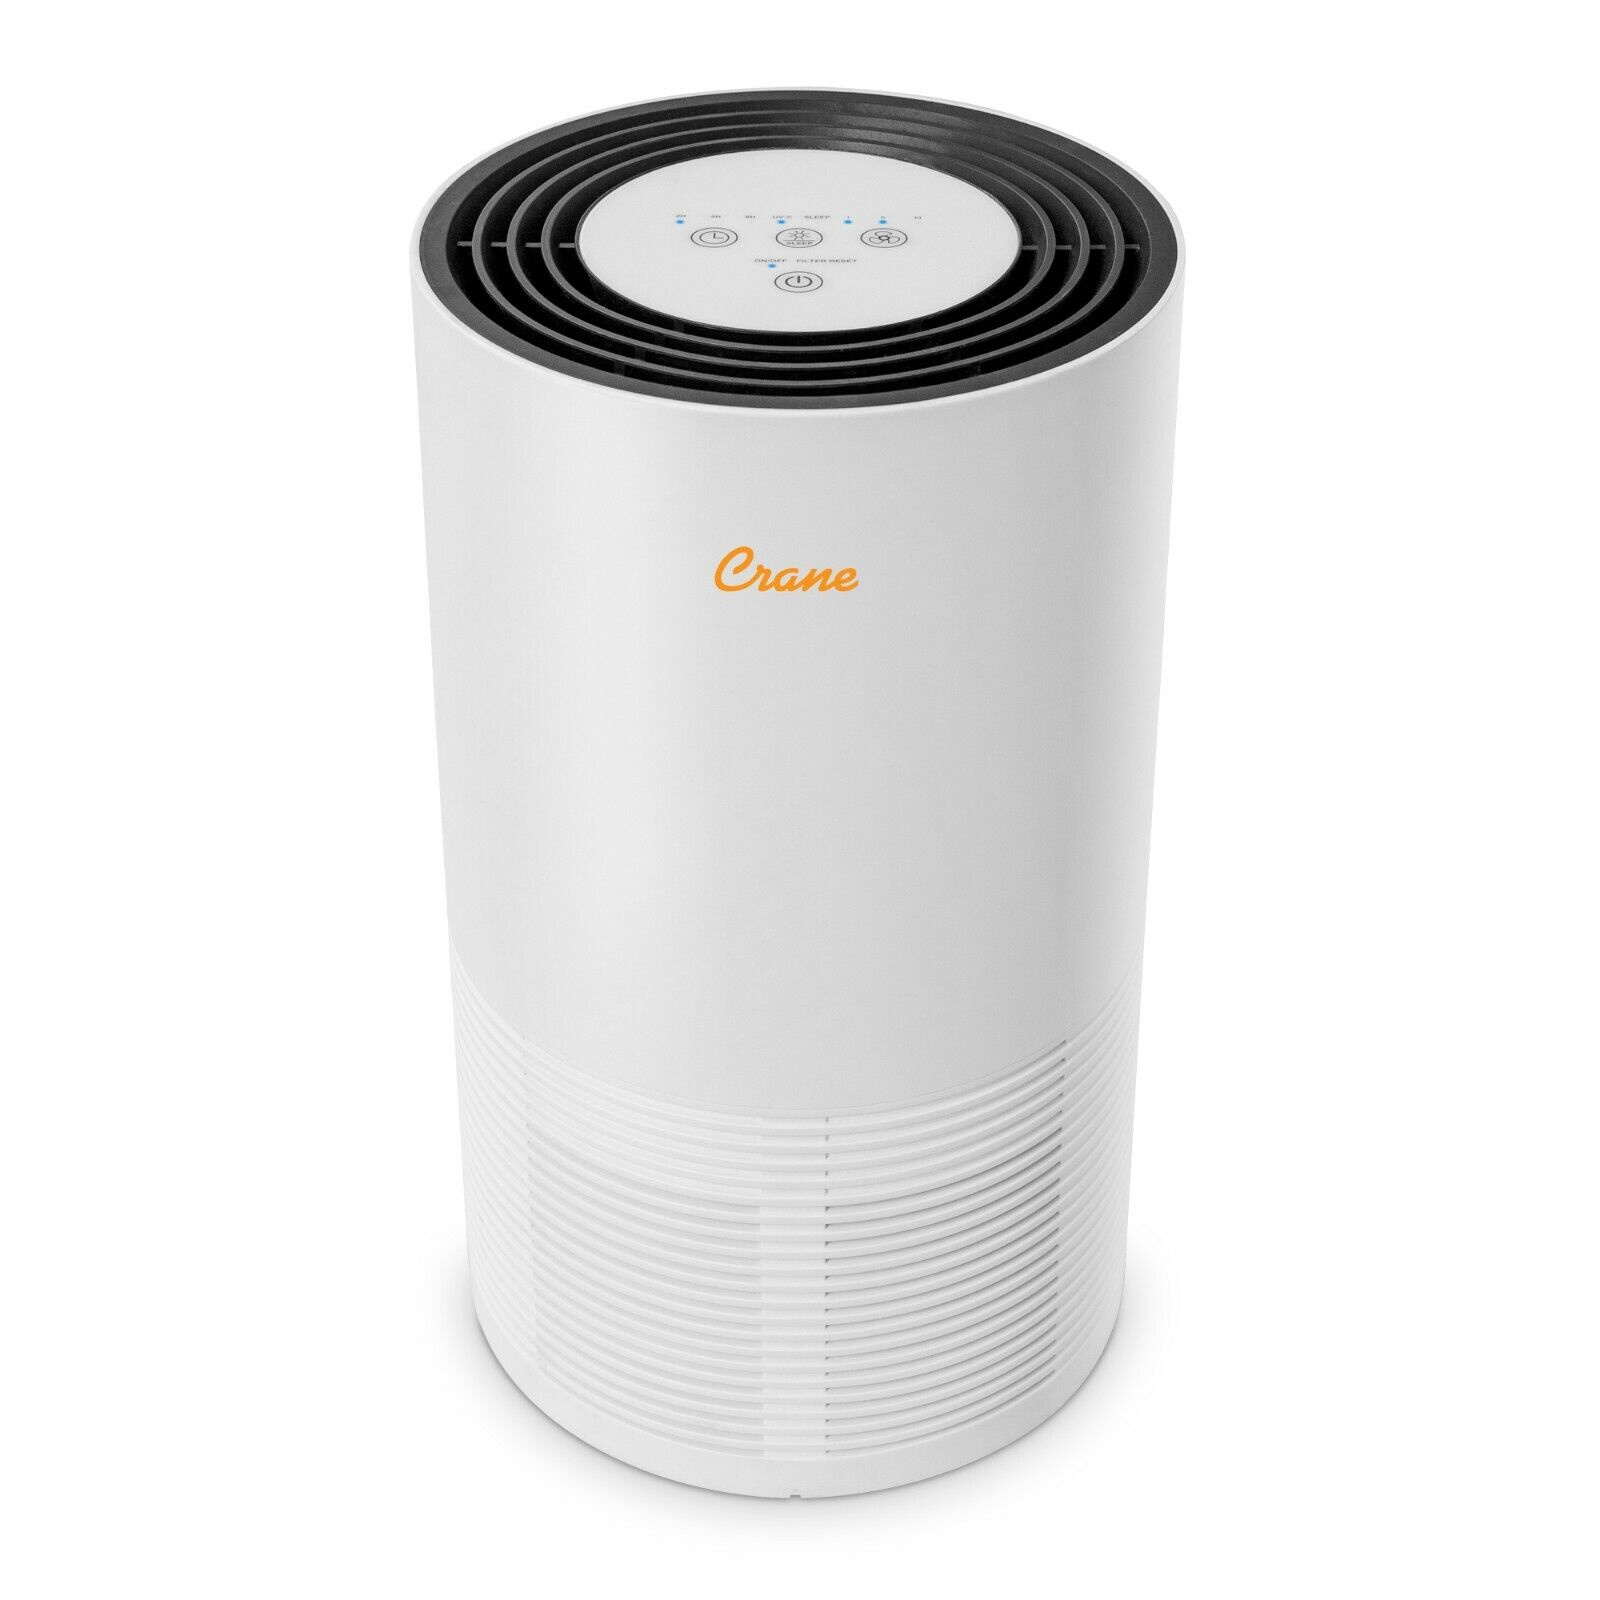 Crane UV Light Air Purifier with True HEPA Filter 3 Speed White for 300 Sq Ft